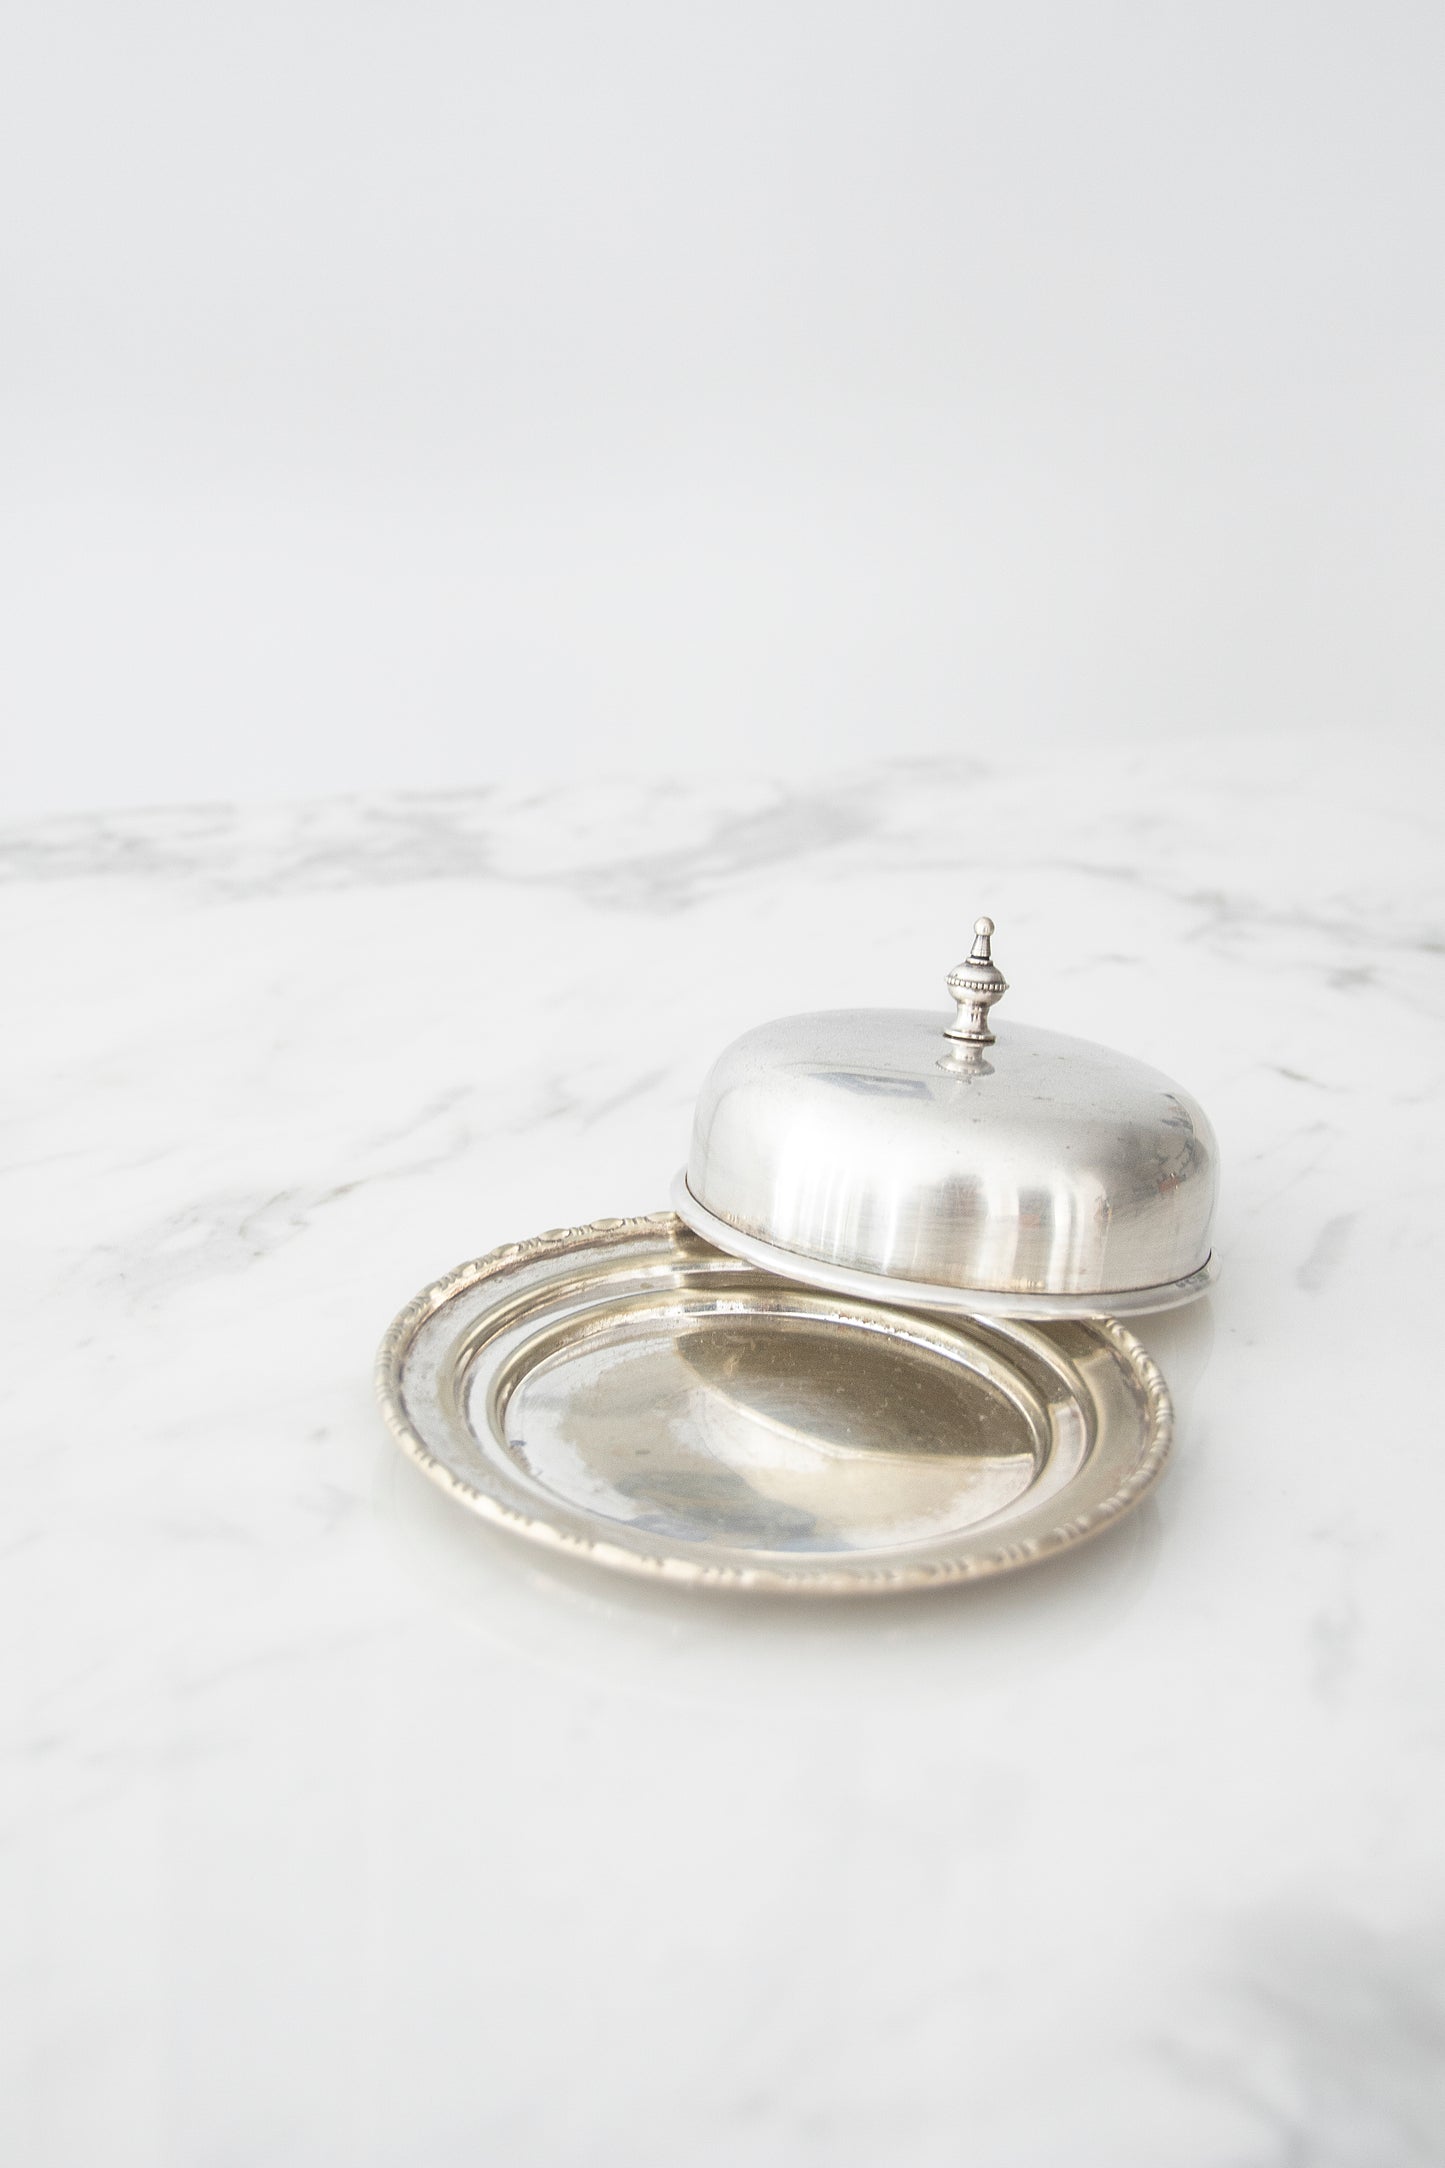 Antique Butter Dish with a Lid